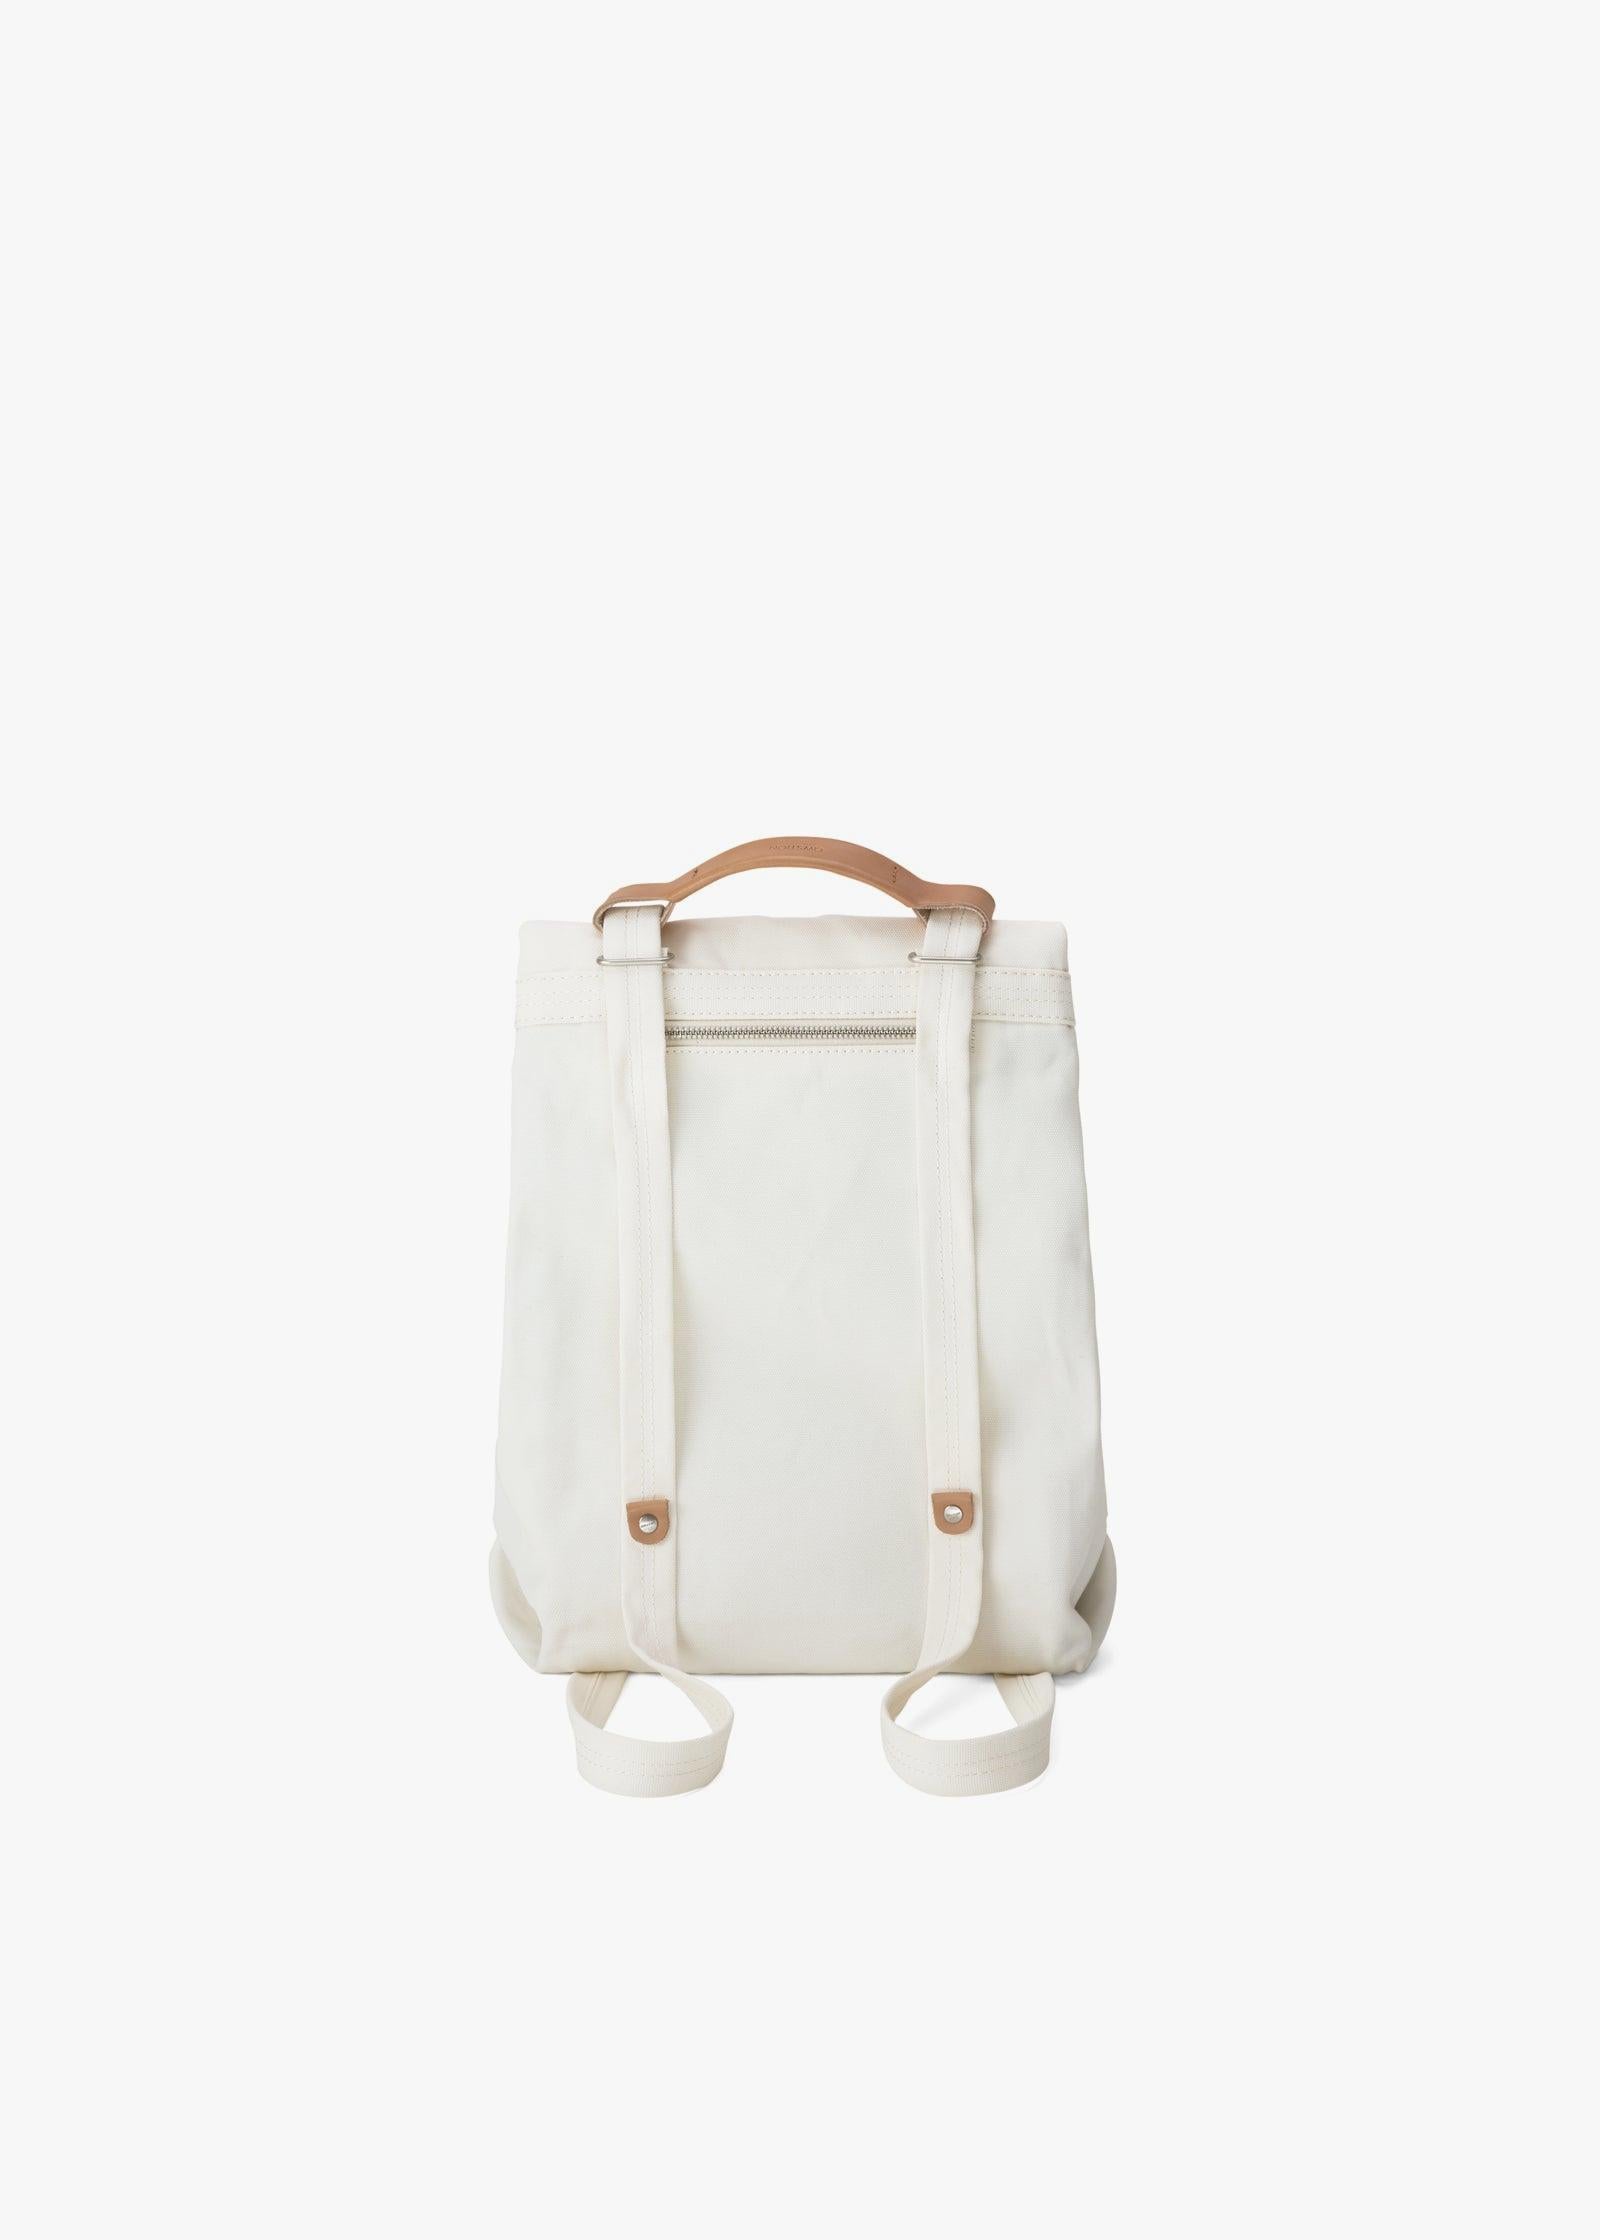 Flap Tote Small – Natural White